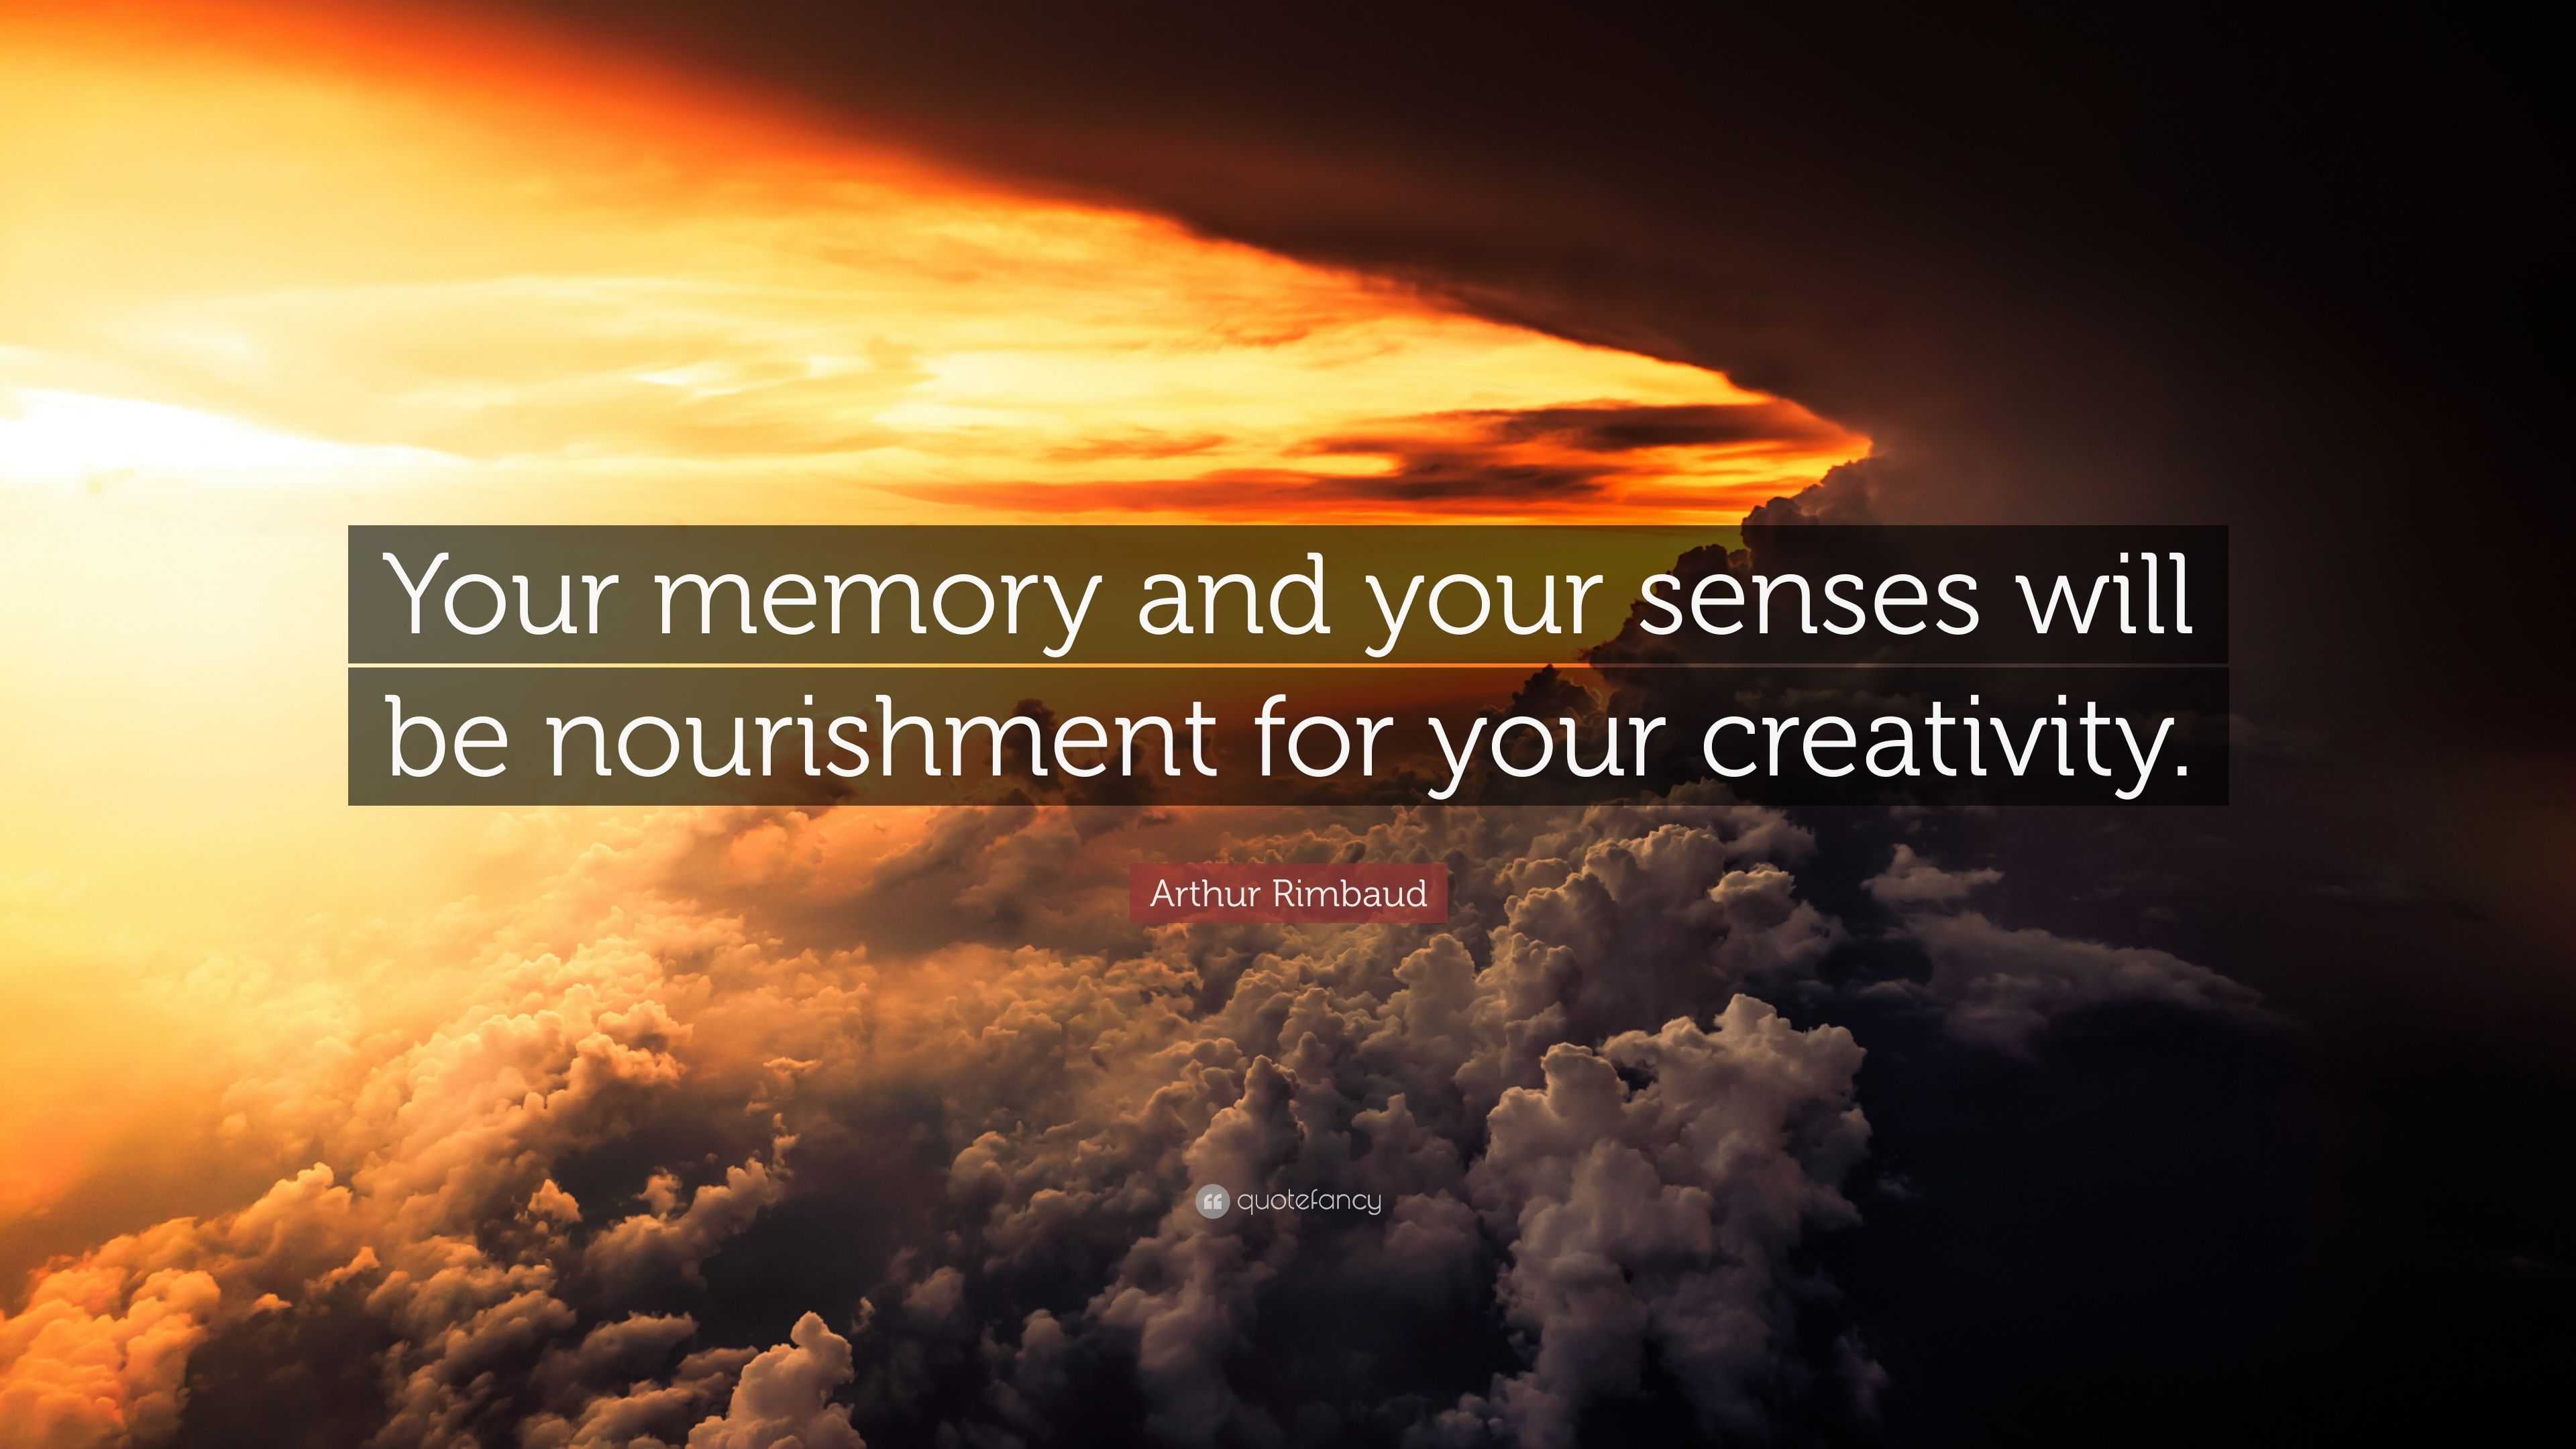 Arthur Rimbaud Quote: “Your memory and your senses will be nourishment ...